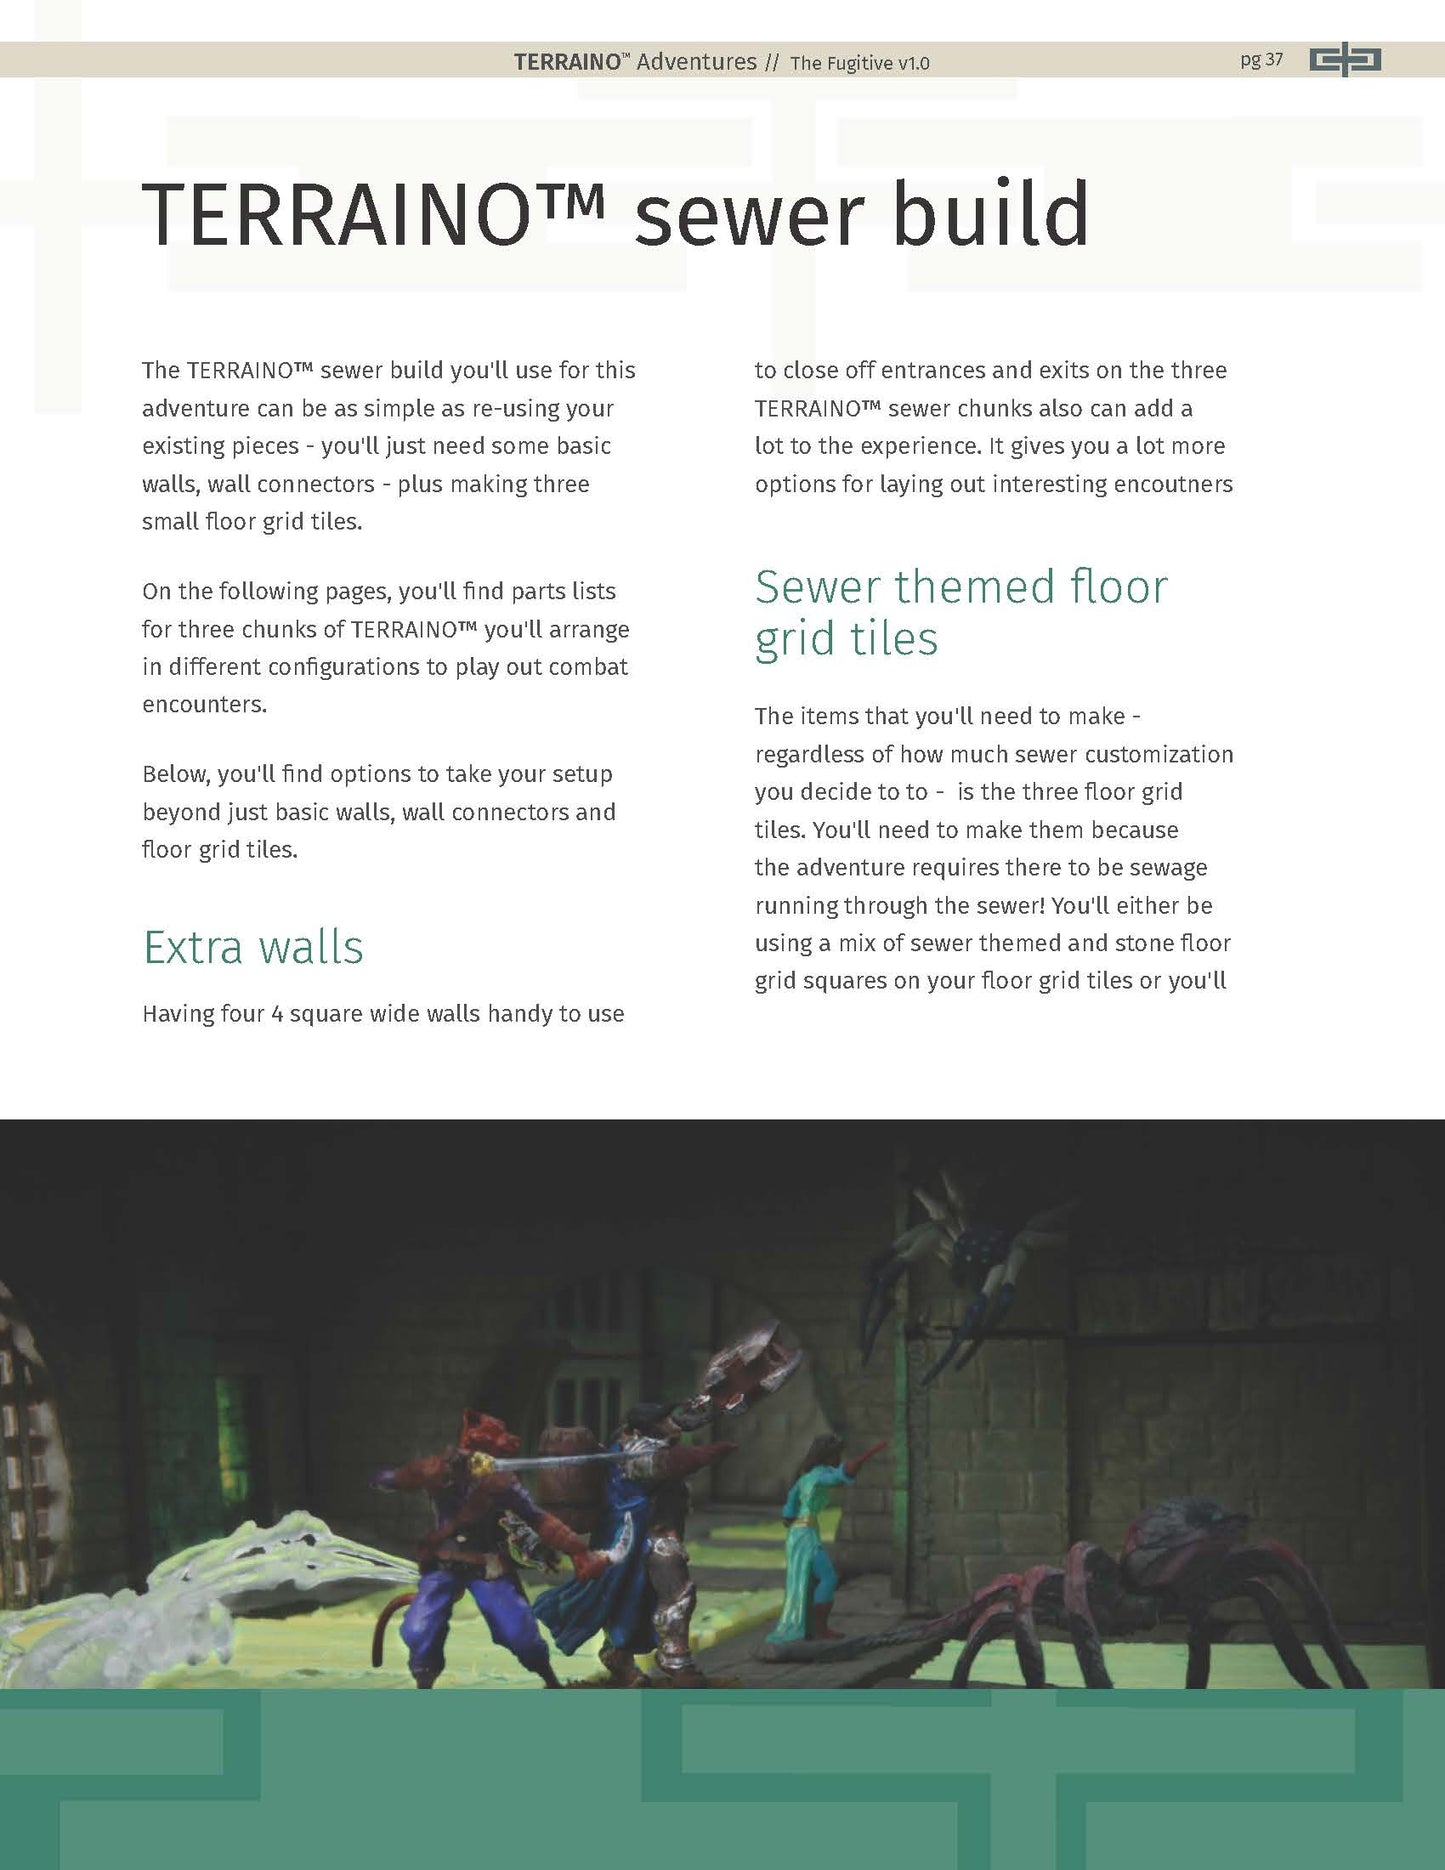 The TERRAINO Adventure comes with build instruction to build sewer tabletop terrain